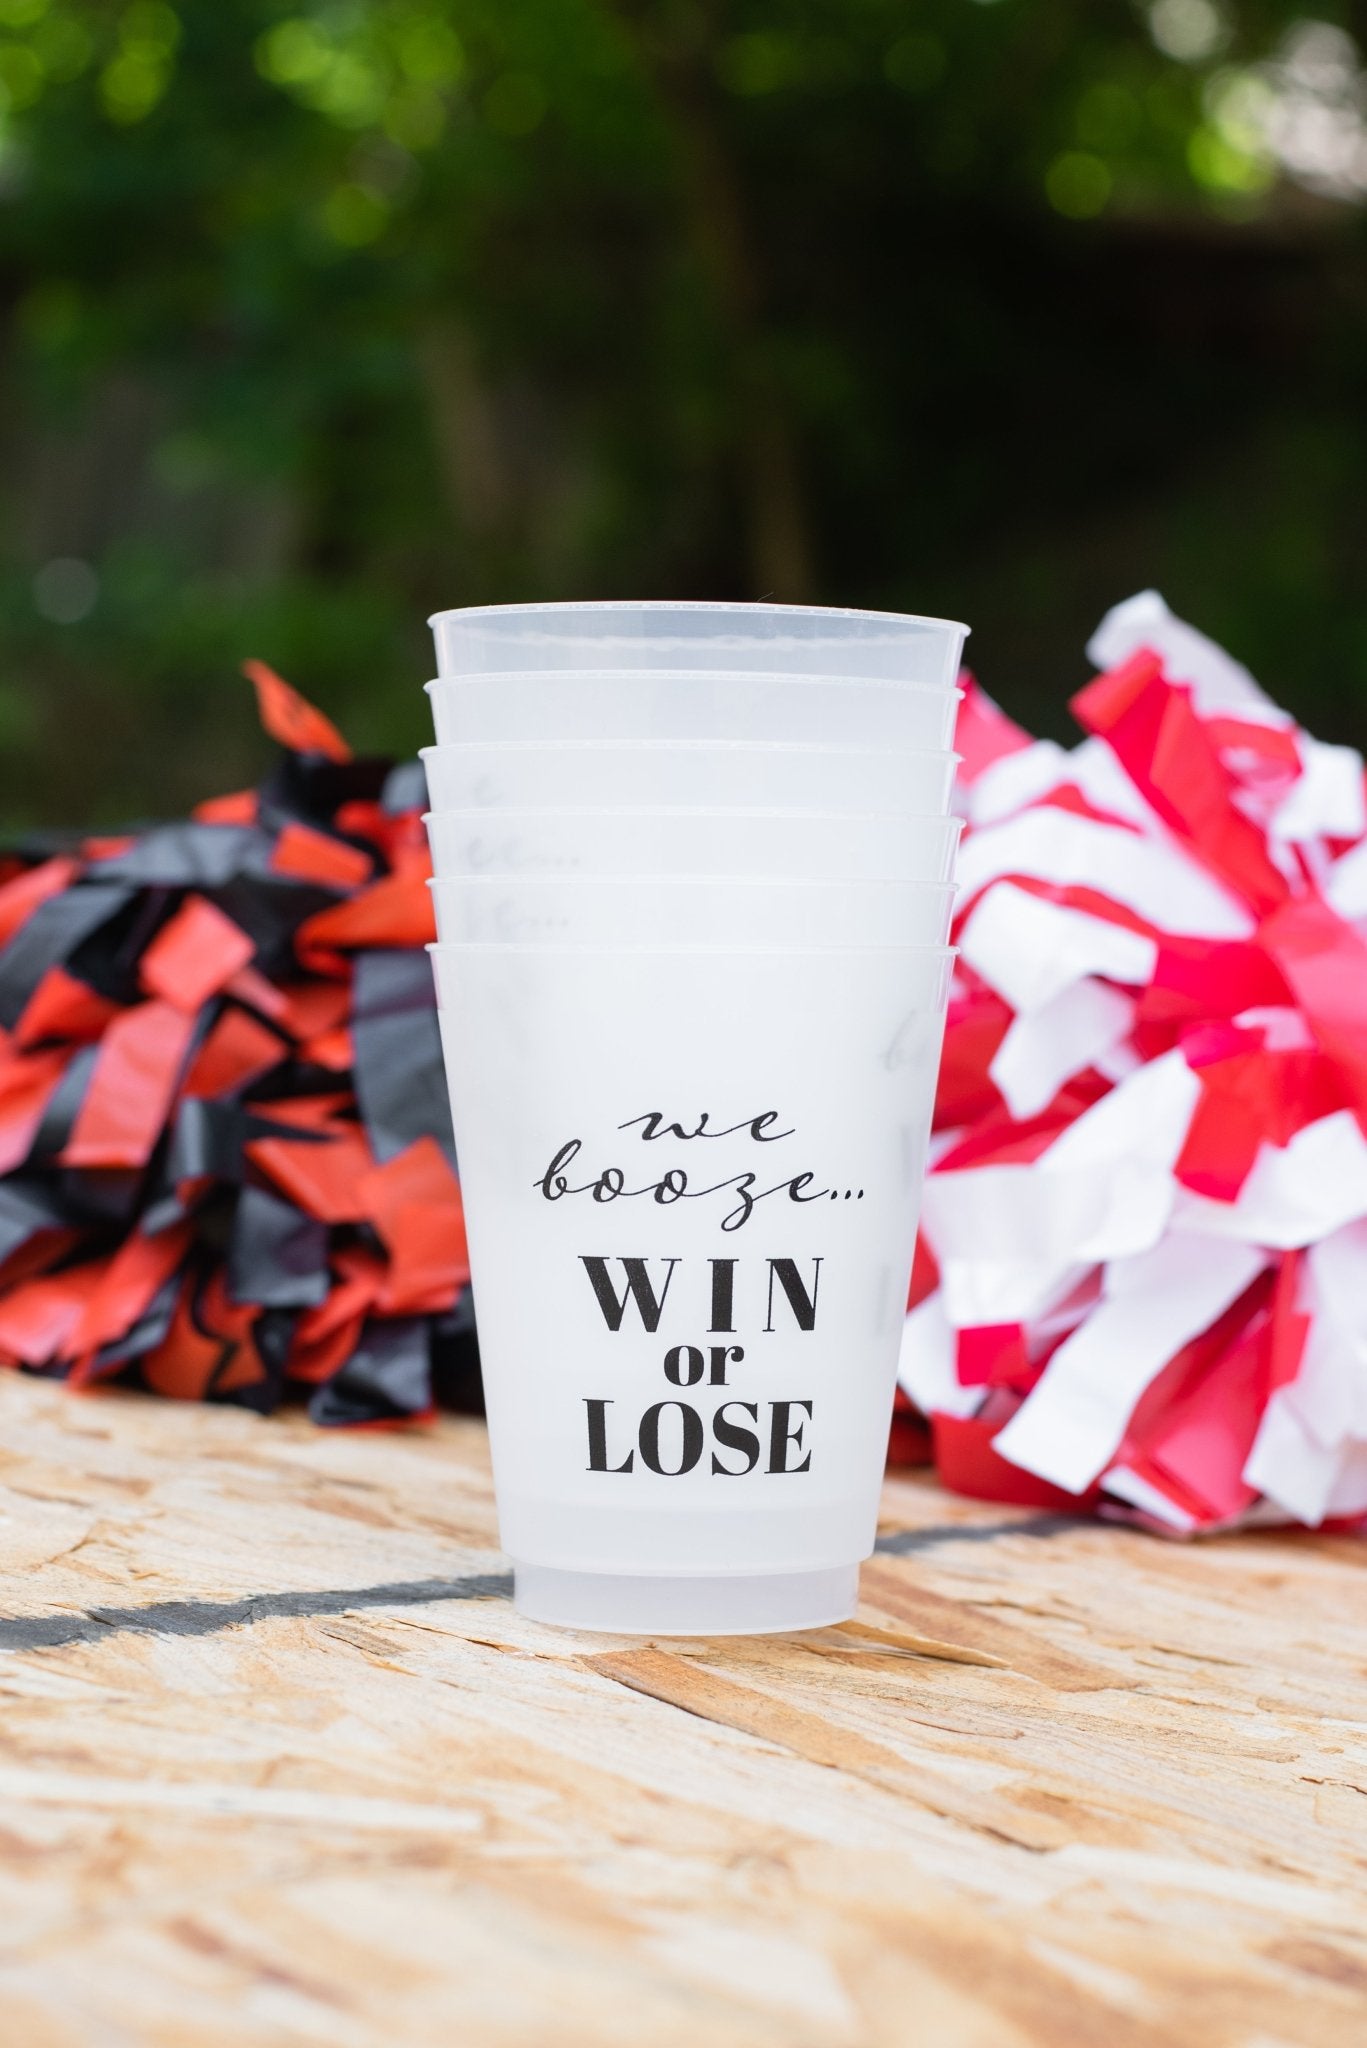 We booze win or lose plastic cups pack of 6 - Trendy Gifts at Lush Fashion Lounge Boutique in Oklahoma City